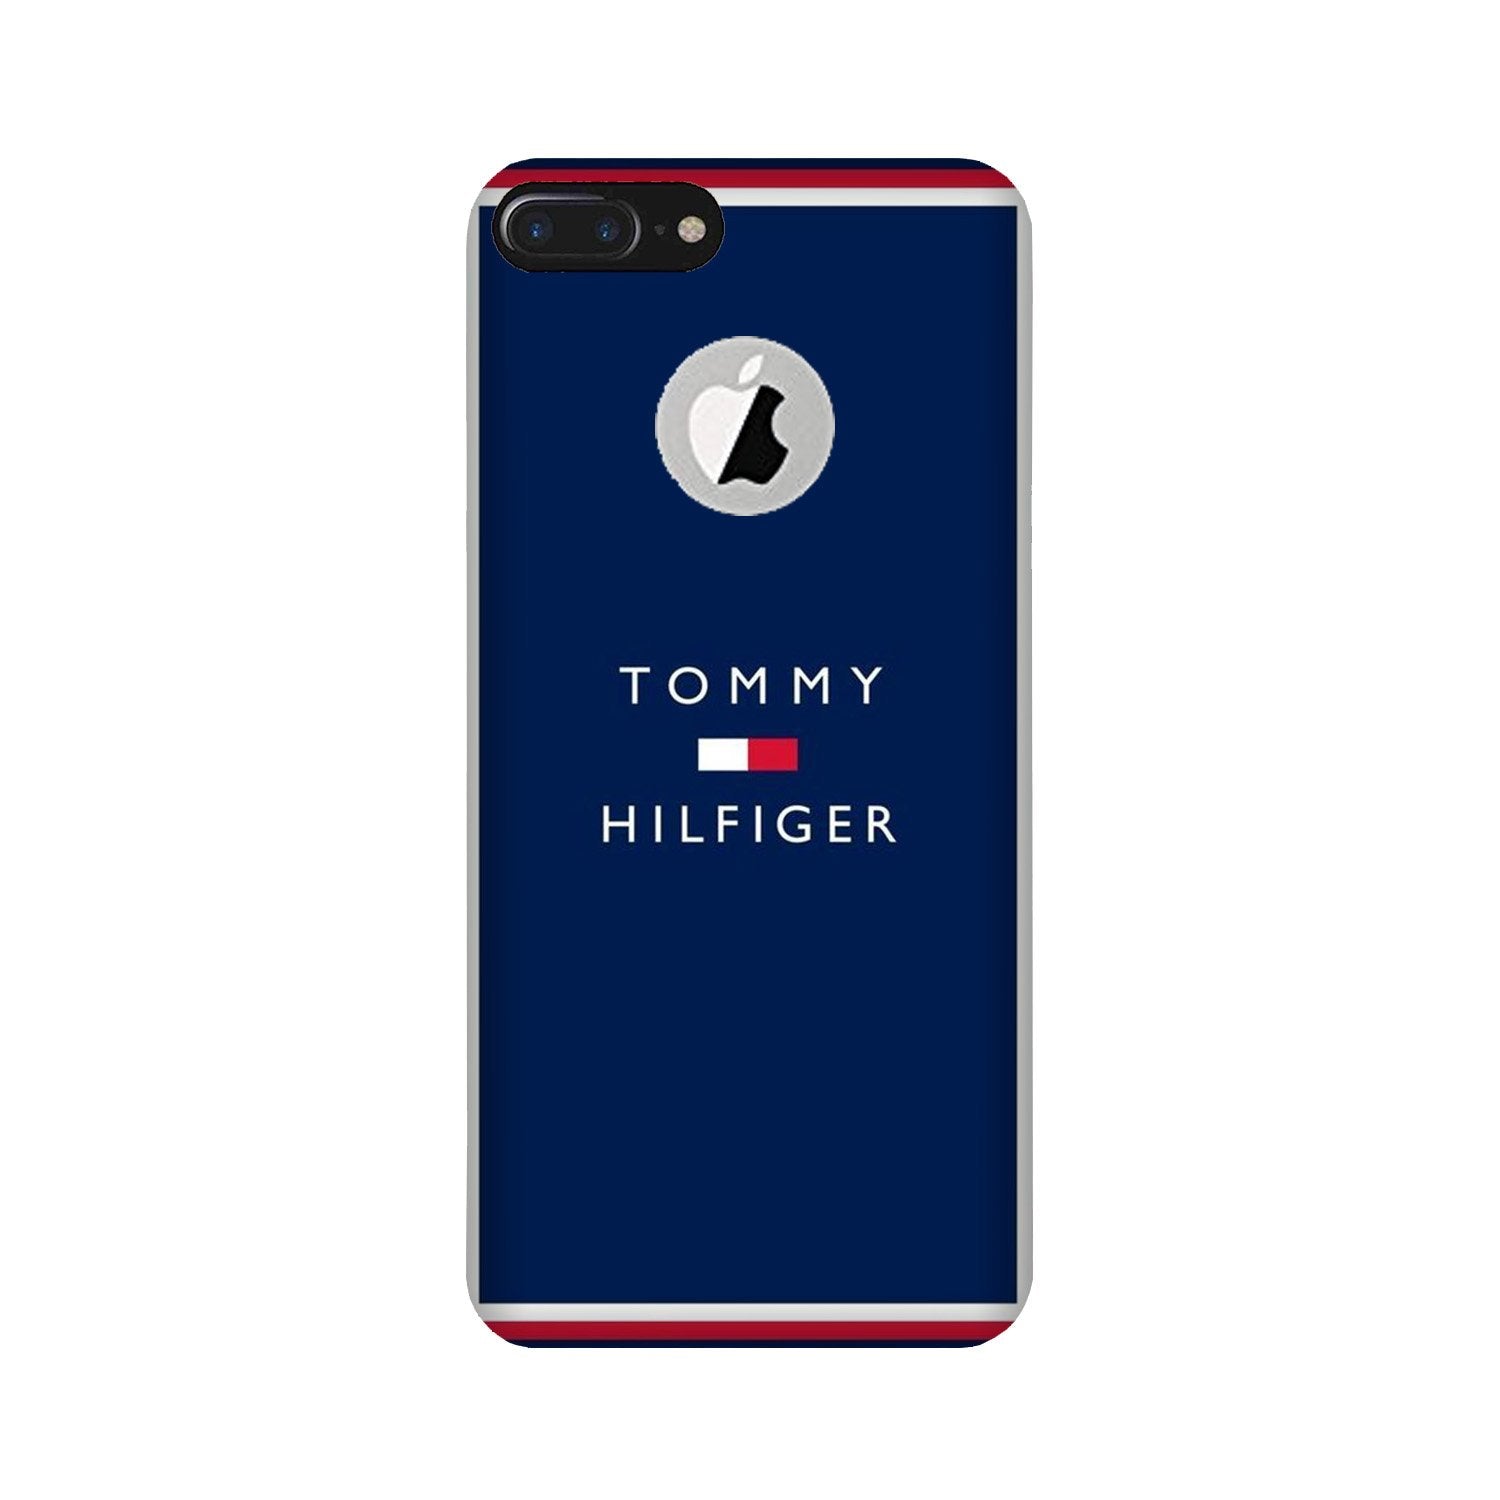 Tommy Hilfiger Mobile Back Case for iPhone 7 Plus logo cut (Design 2 – theStyleO